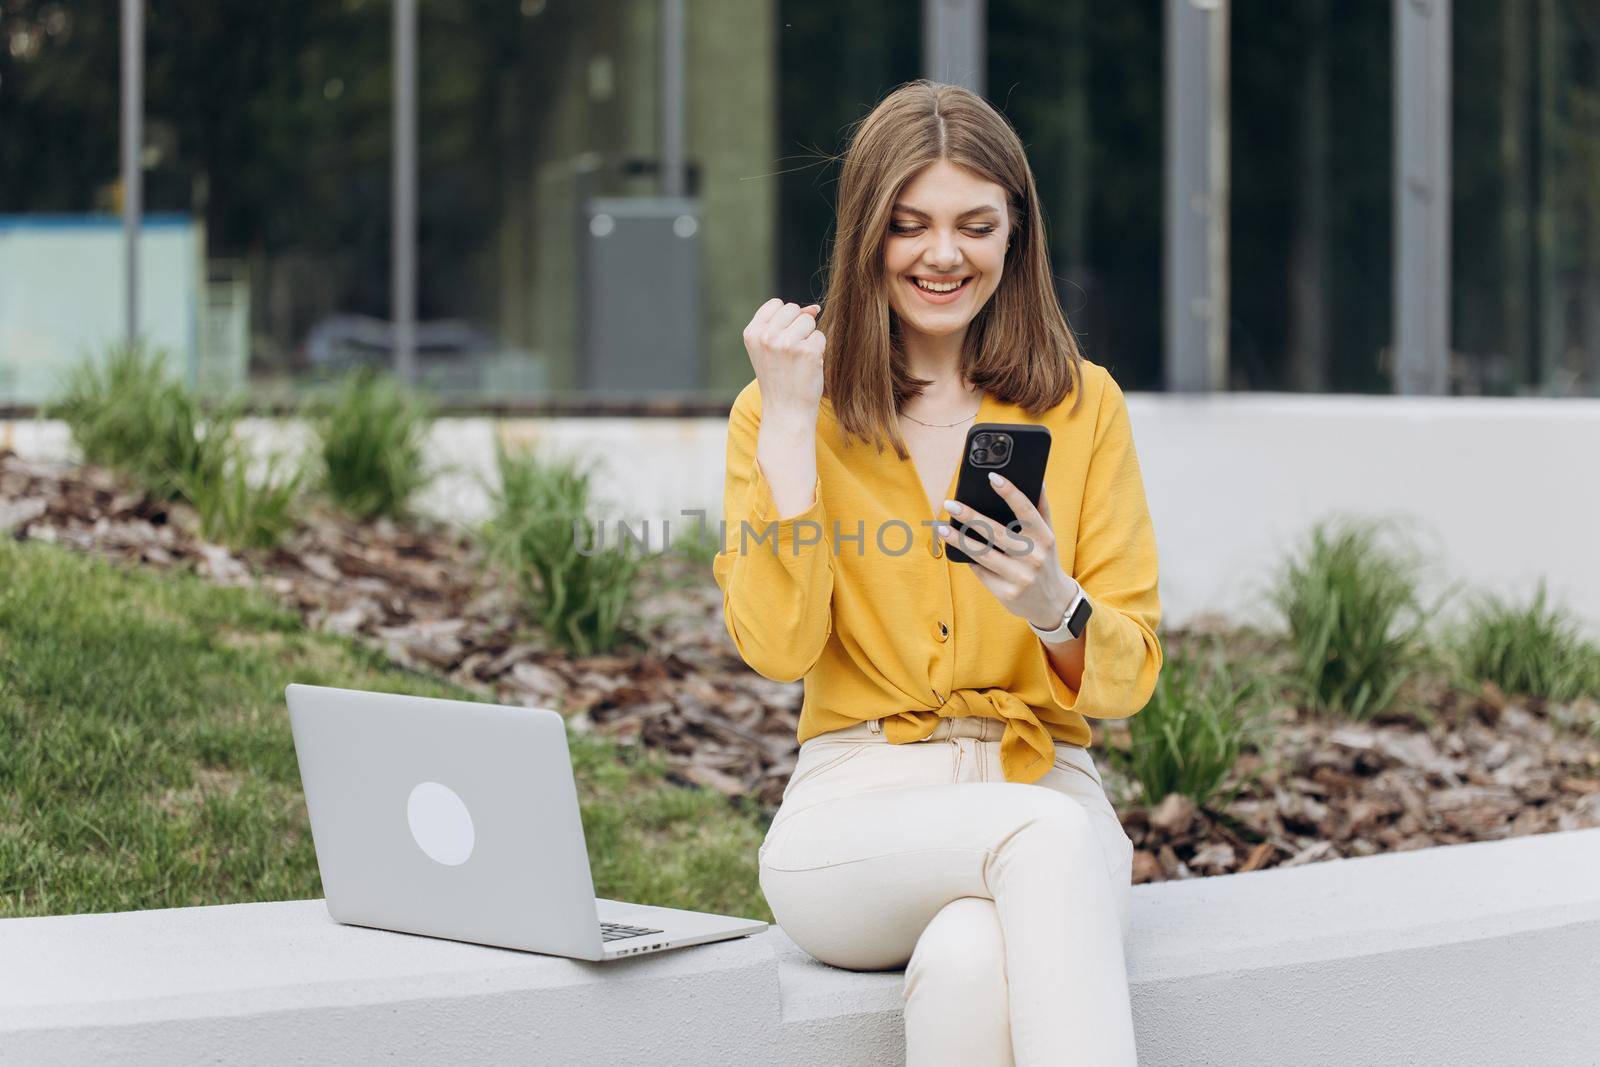 Surprised lady celebrating victory on smartphone outdoor. Portrait of happy business caucasian woman enjoy success on mobile phone. Joyful girl reading good news on phone.